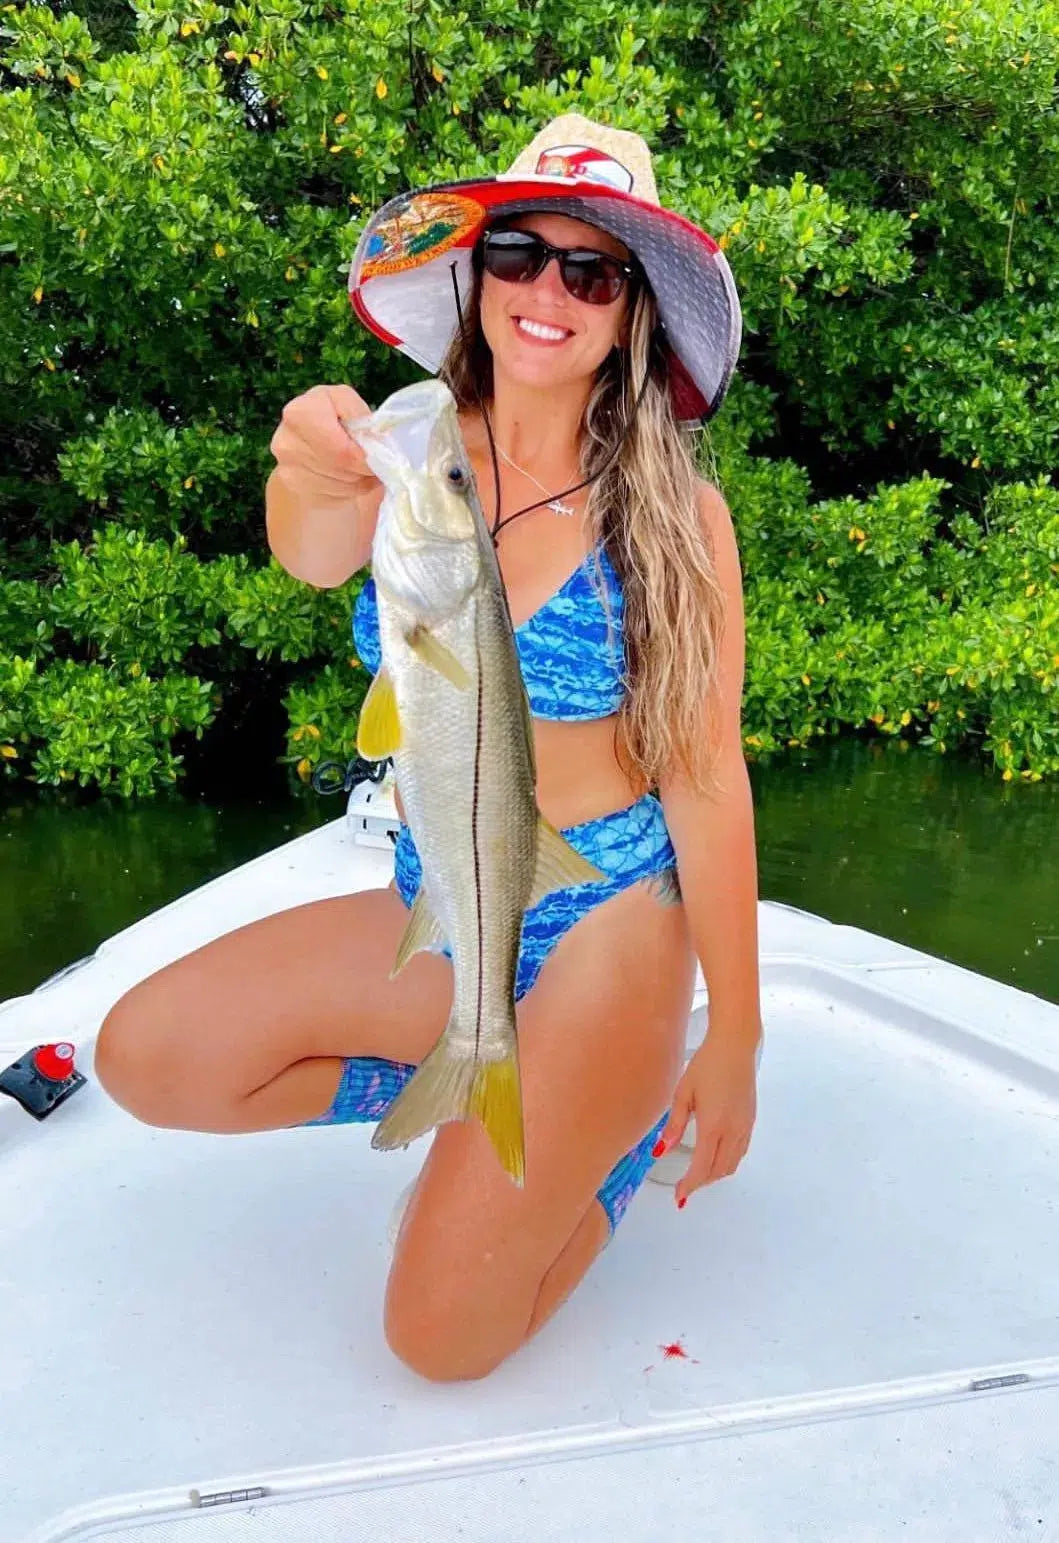 Snook Fishing Hat | Fish Hats | Snook Hat White